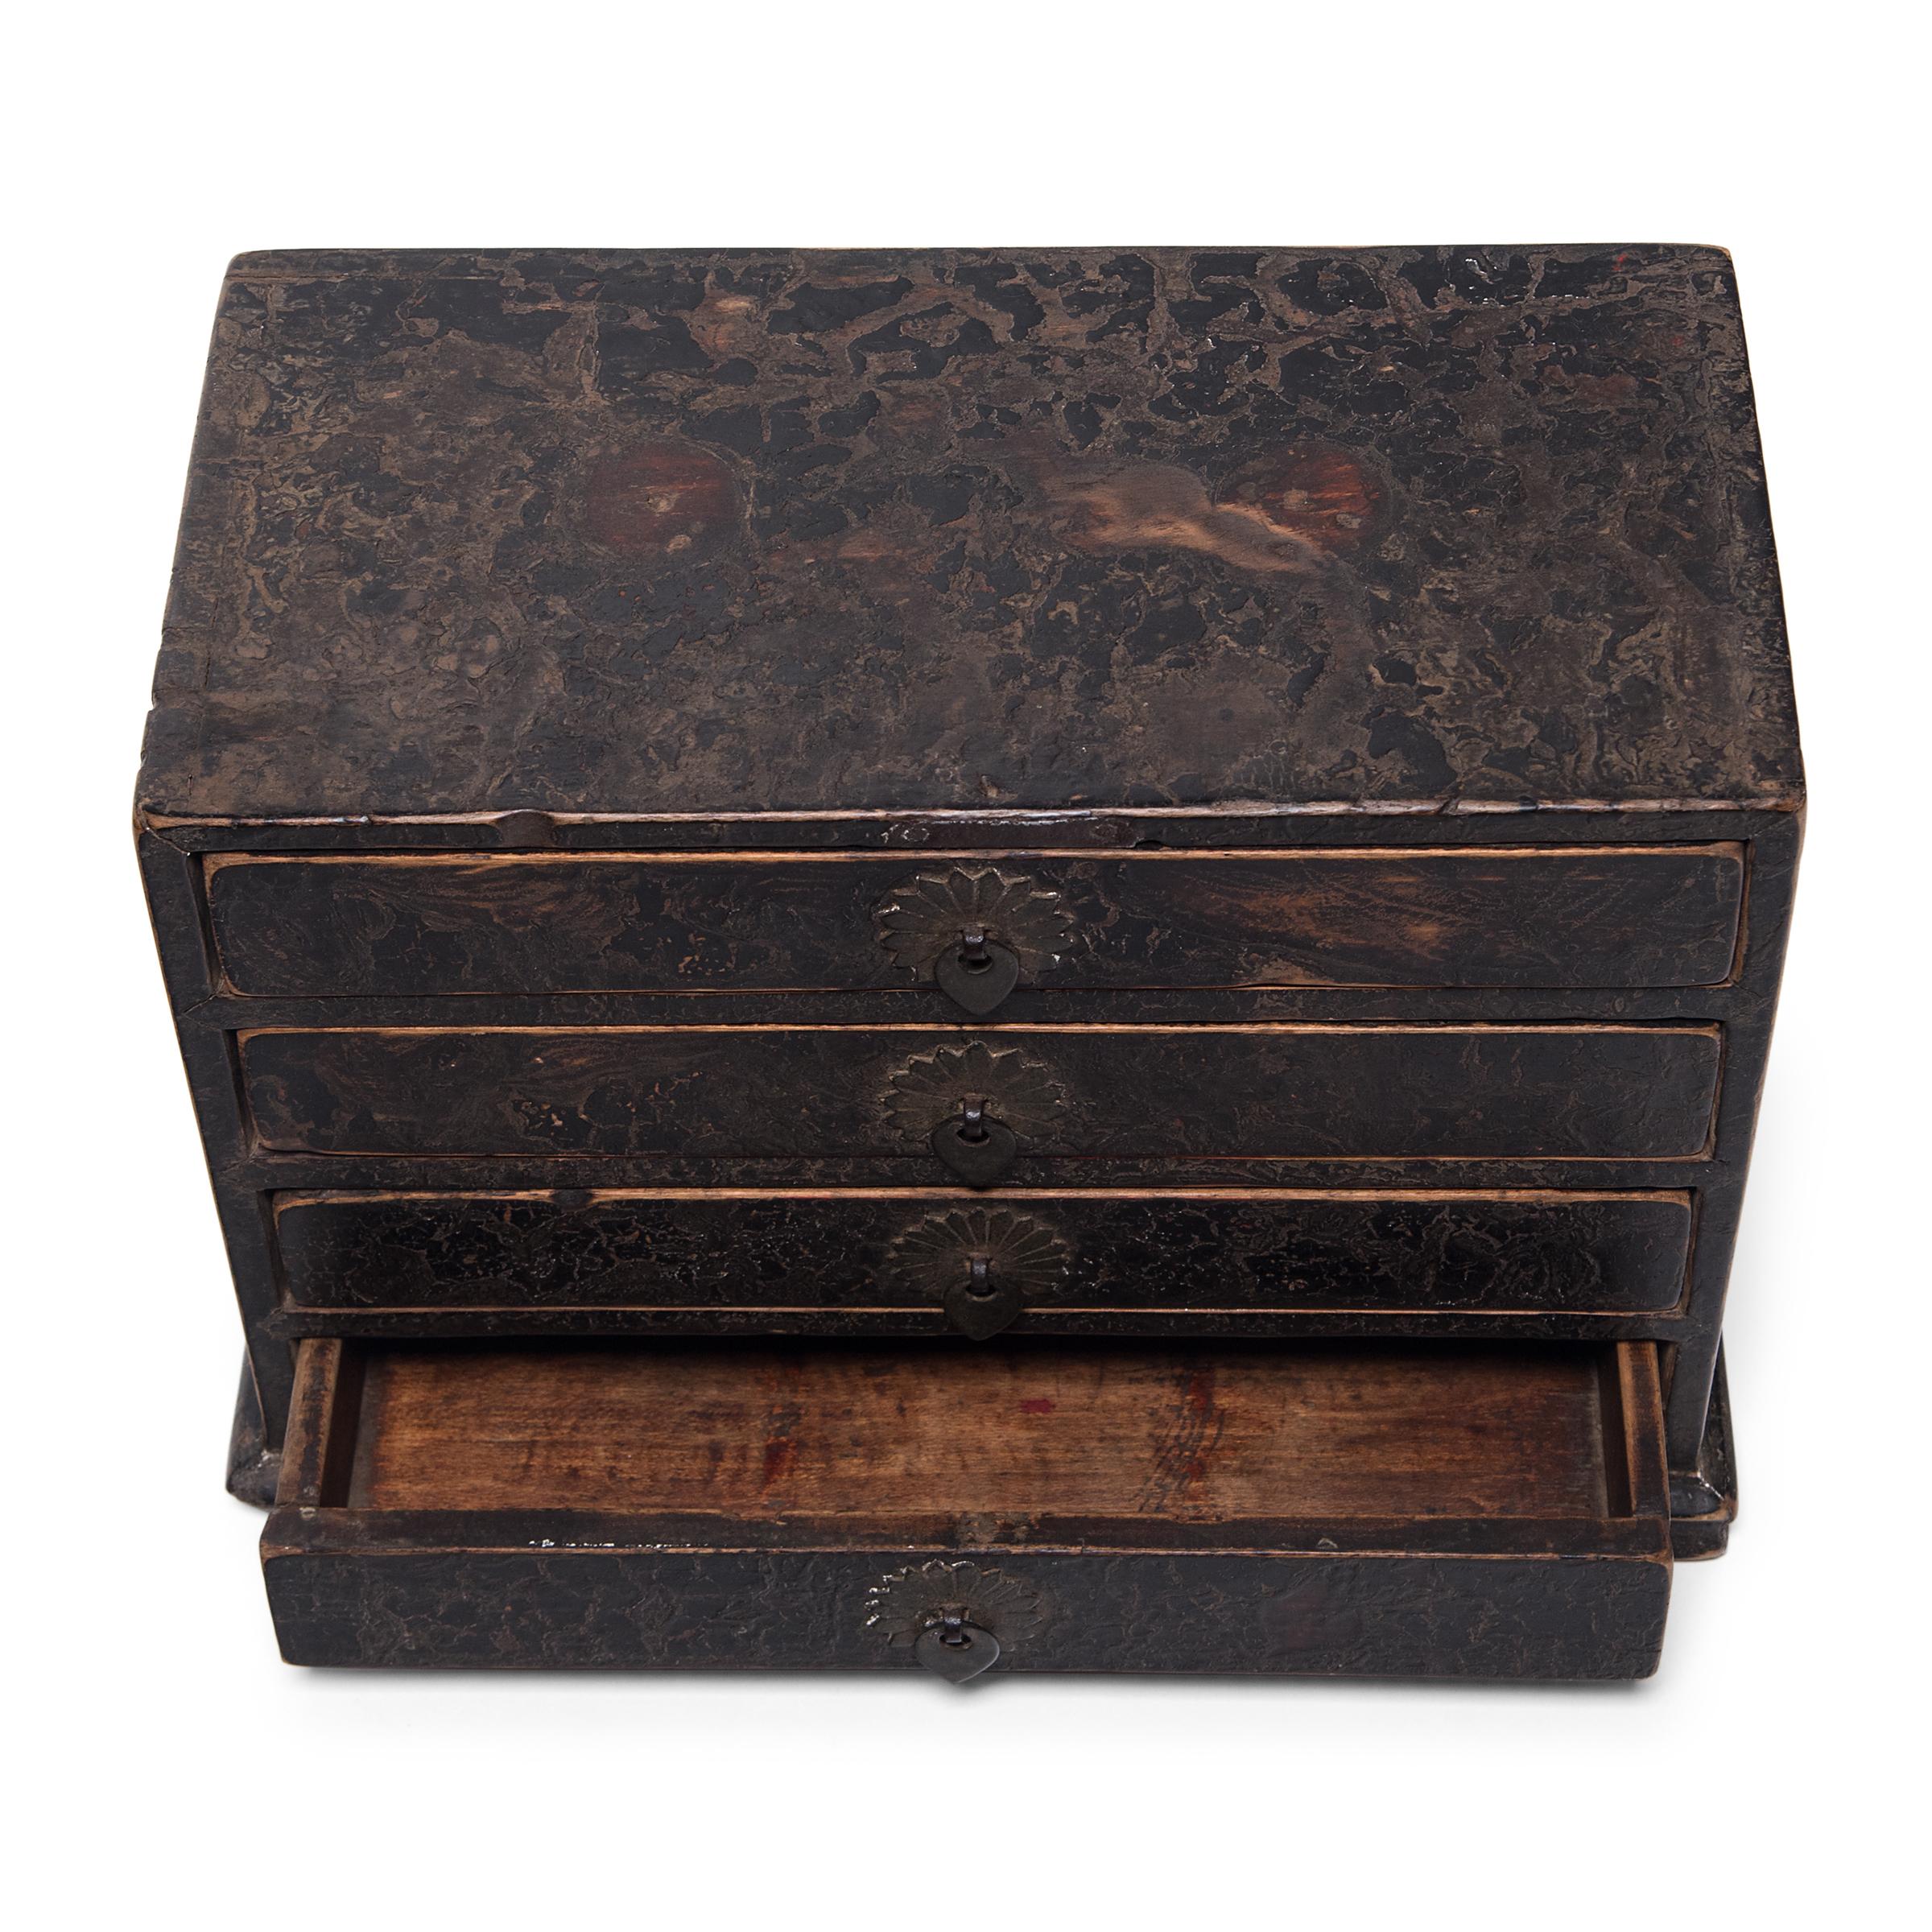 19th Century Chinese Crackled Lacquer Autumn Altar Box, circa 1850 For Sale